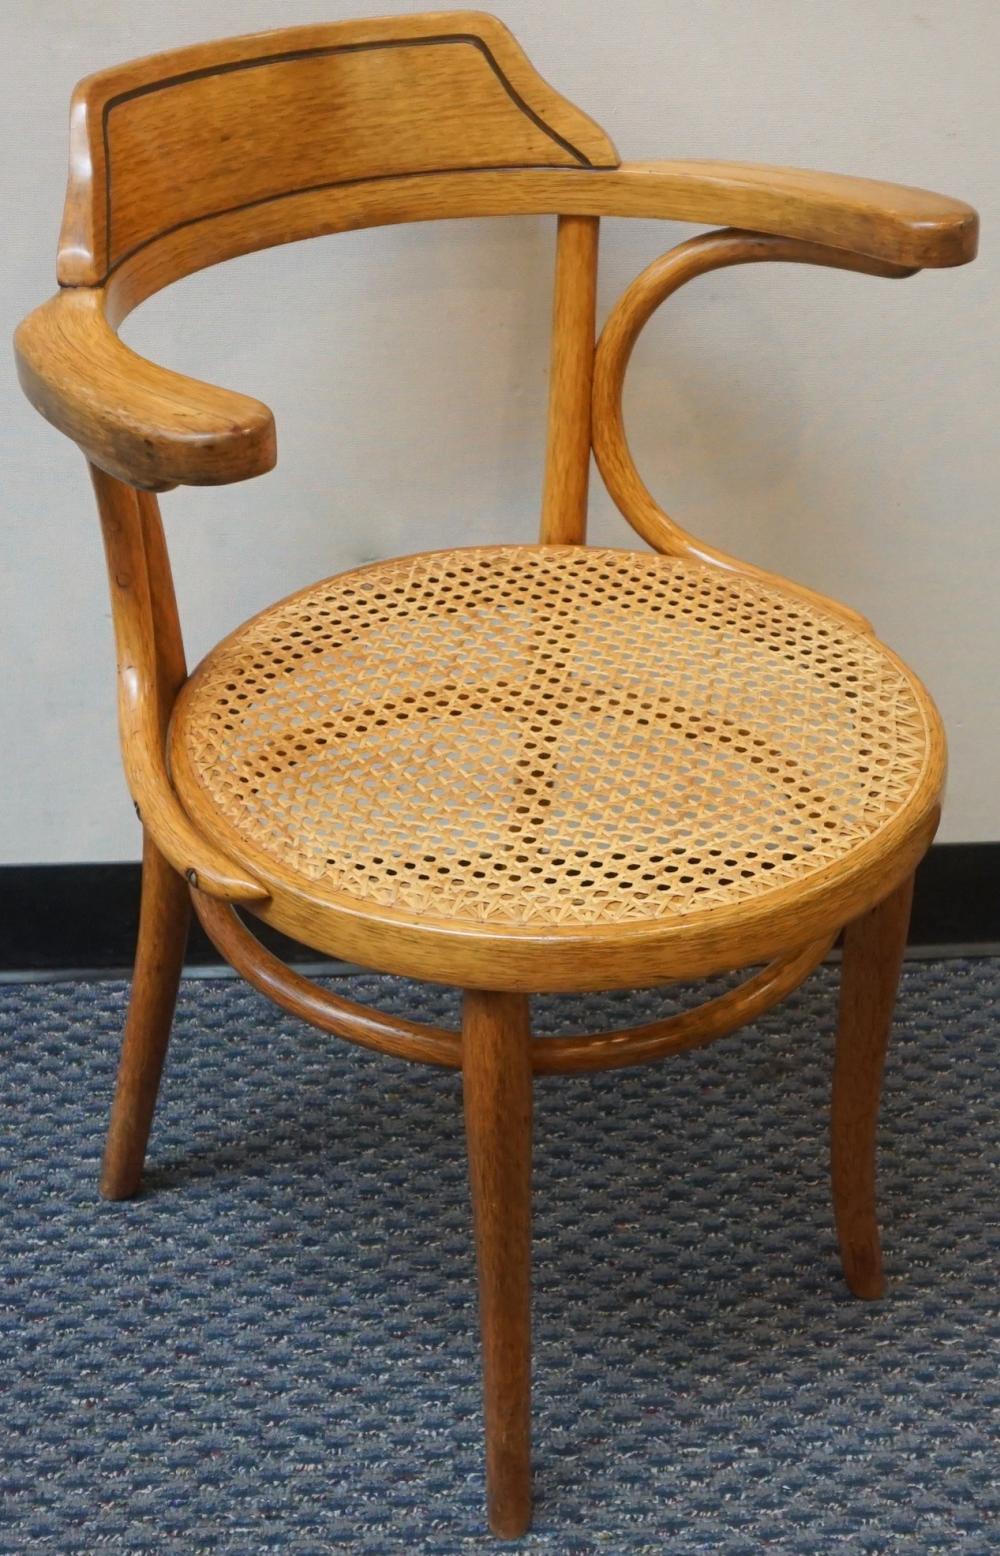 THONET AUSTRIA CANED SEAT AND BENTWOOD 32b19c